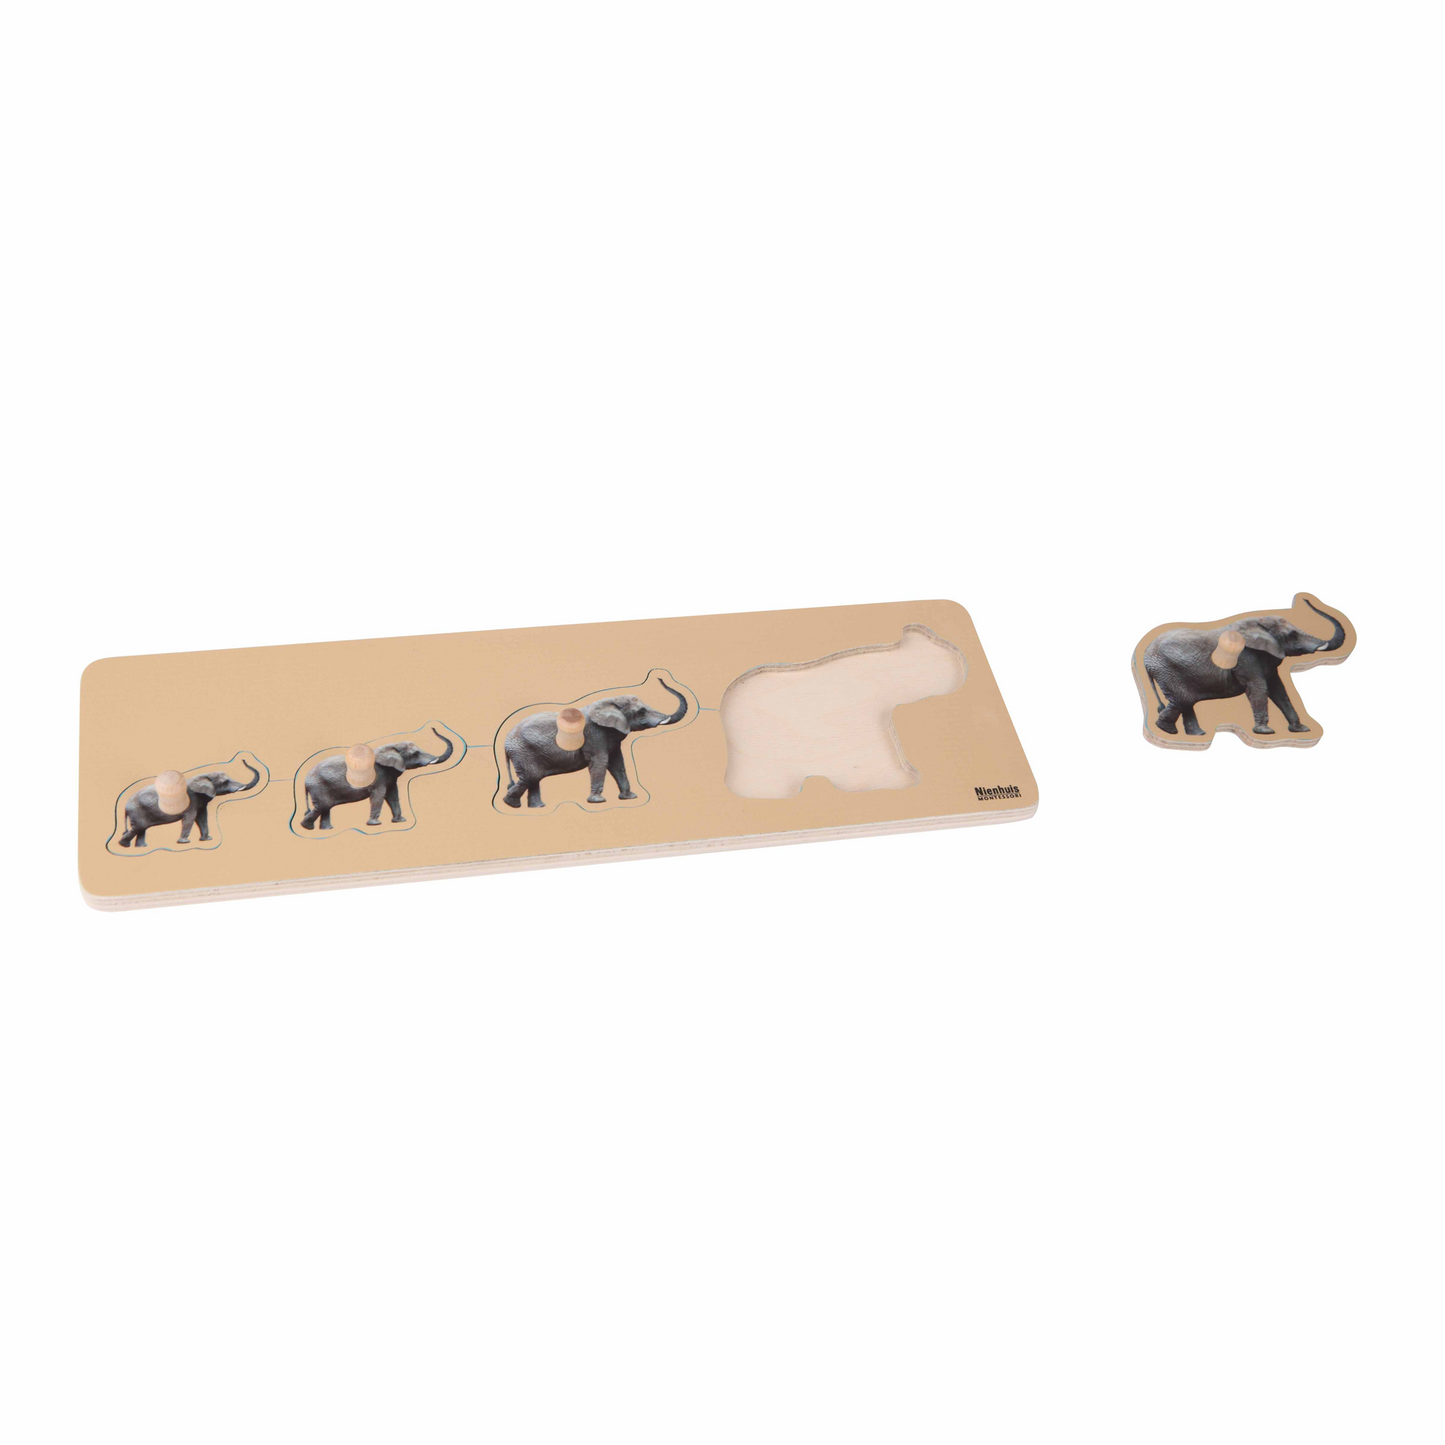 Puzzle for toddlers: elephants - Nienhuis AMI